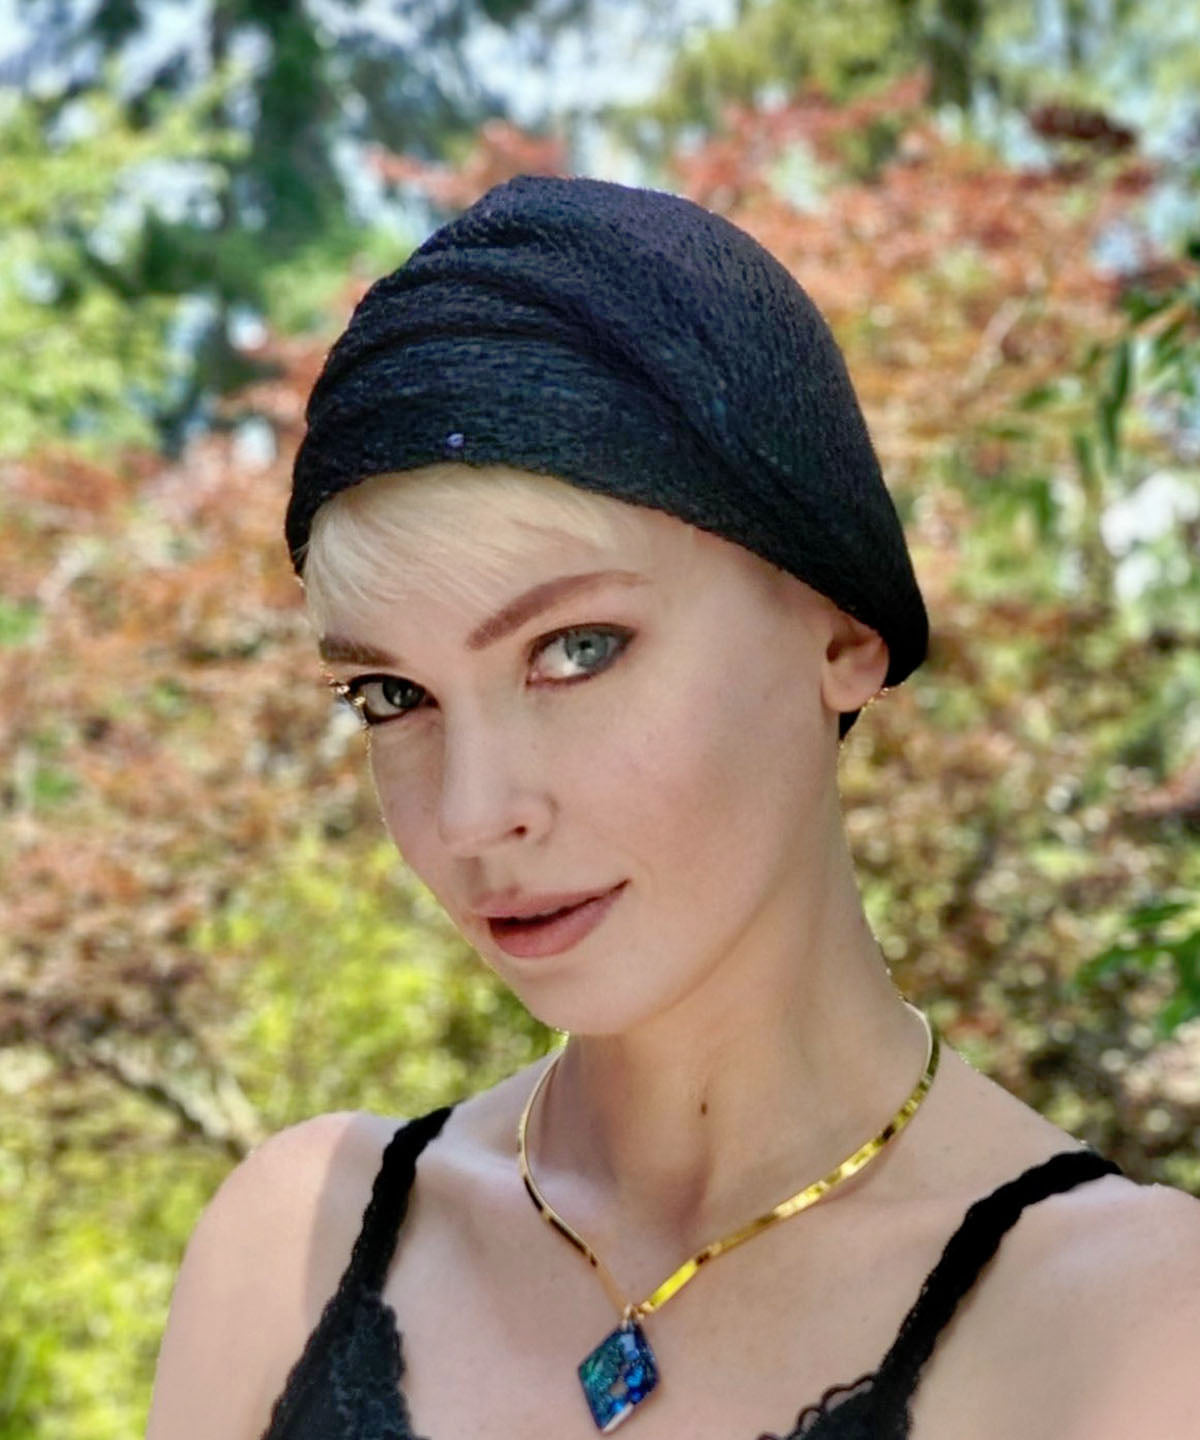 Women's Rowdie Hat in Glitzy Glam in Black with Abyss and Maple Glow Faux Fur Shoulder Wrap | Handmade in Seattle WA | Pandemonium Millinery